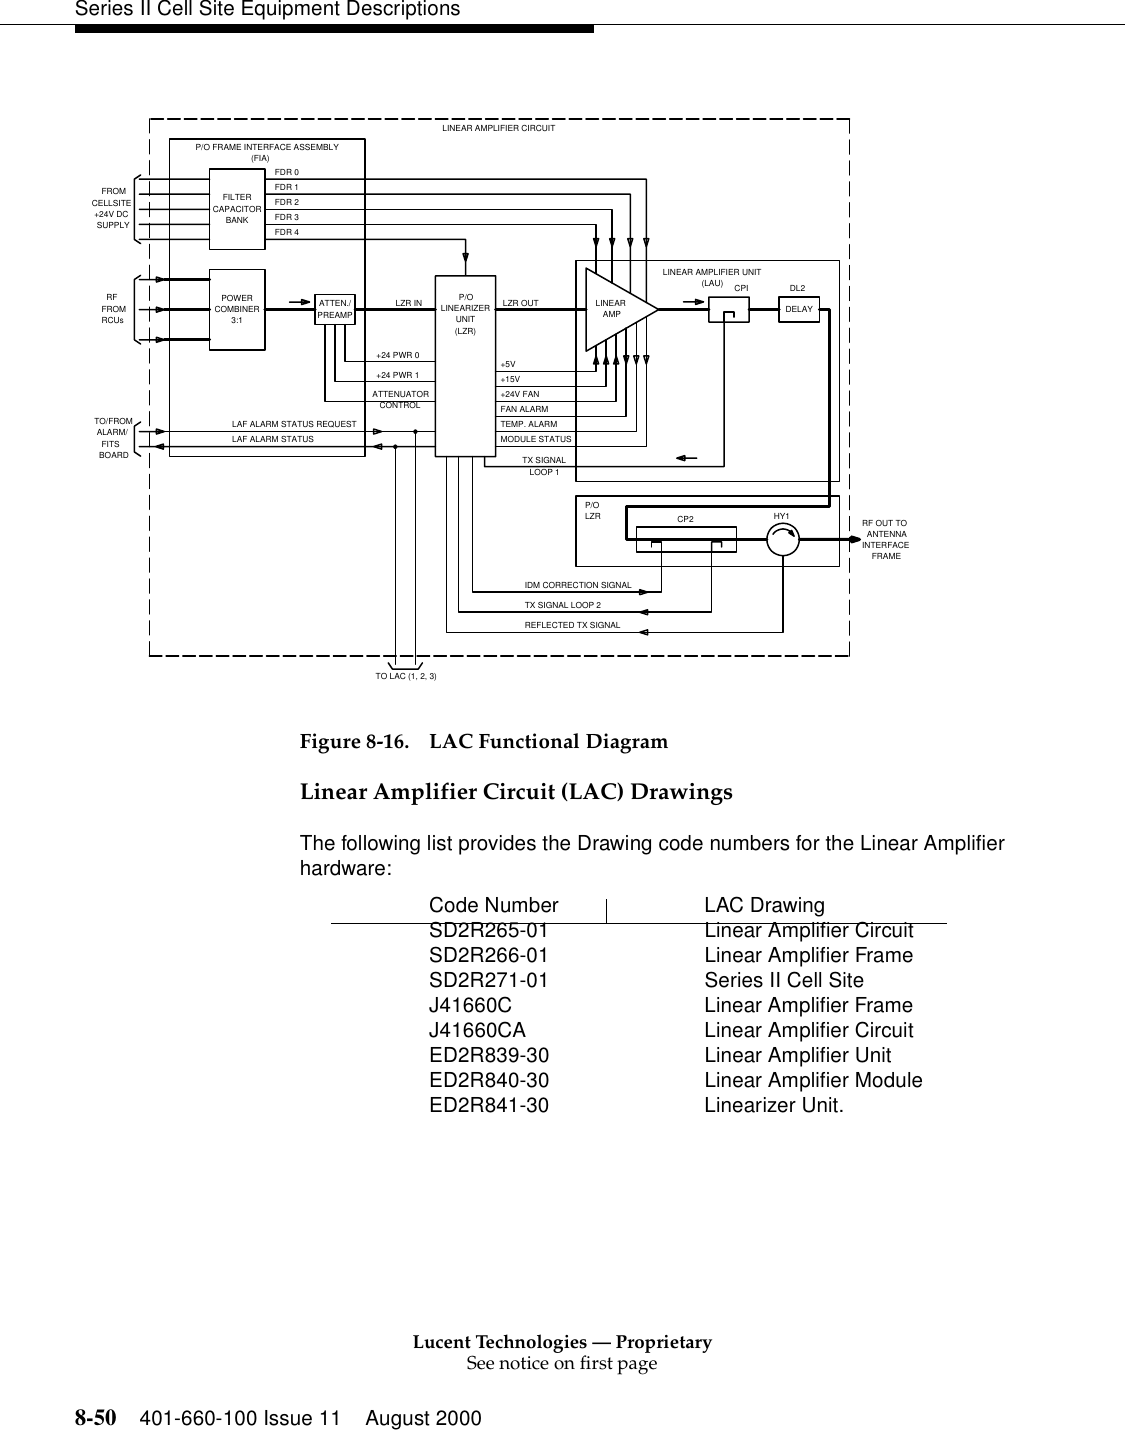 Lucent Technologies — ProprietarySee notice on first page8-50 401-660-100 Issue 11 August 2000Series II Cell Site Equipment DescriptionsFigure 8-16. LAC Functional DiagramLinear Amplifier Circuit (LAC) DrawingsThe following list provides the Drawing code numbers for the Linear Amplifier hardware:  LZRP/OCP2 HY1DL2CPIRCUsTO LAC (1, 2, 3)LINEAR AMPLIFIER UNIT+15V+5VFRAMEINTERFACEANTENNARF OUT TOLOOP 1DELAYTX SIGNAL(LAU)AMPLINEARMODULE STATUSTEMP. ALARMFAN ALARM+24V FANLZR OUTFDR 4FDR 3FDR 2FDR 1P/OBOARDFITSALARM/TO/FROMFROMLAF ALARM STATUS+24 PWR 1CONTROLATTENUATOR+24 PWR 0LZR INRFSUPPLY+24V DCCELLSITEFROMFDR 0PREAMPATTEN./3:1COMBINERPOWERBANKCAPACITORFILTER(FIA)P/O FRAME INTERFACE ASSEMBLYLINEAR AMPLIFIER CIRCUITLAF ALARM STATUS REQUEST(LZR)UNITLINEARIZERTX SIGNAL LOOP 2REFLECTED TX SIGNALIDM CORRECTION SIGNALCode Number LAC DrawingSD2R265-01 Linear Amplifier Circuit SD2R266-01 Linear Amplifier Frame SD2R271-01  Series II Cell Site J41660C Linear Amplifier Frame J41660CA Linear Amplifier Circuit ED2R839-30 Linear Amplifier Unit ED2R840-30 Linear Amplifier Module ED2R841-30 Linearizer Unit. 